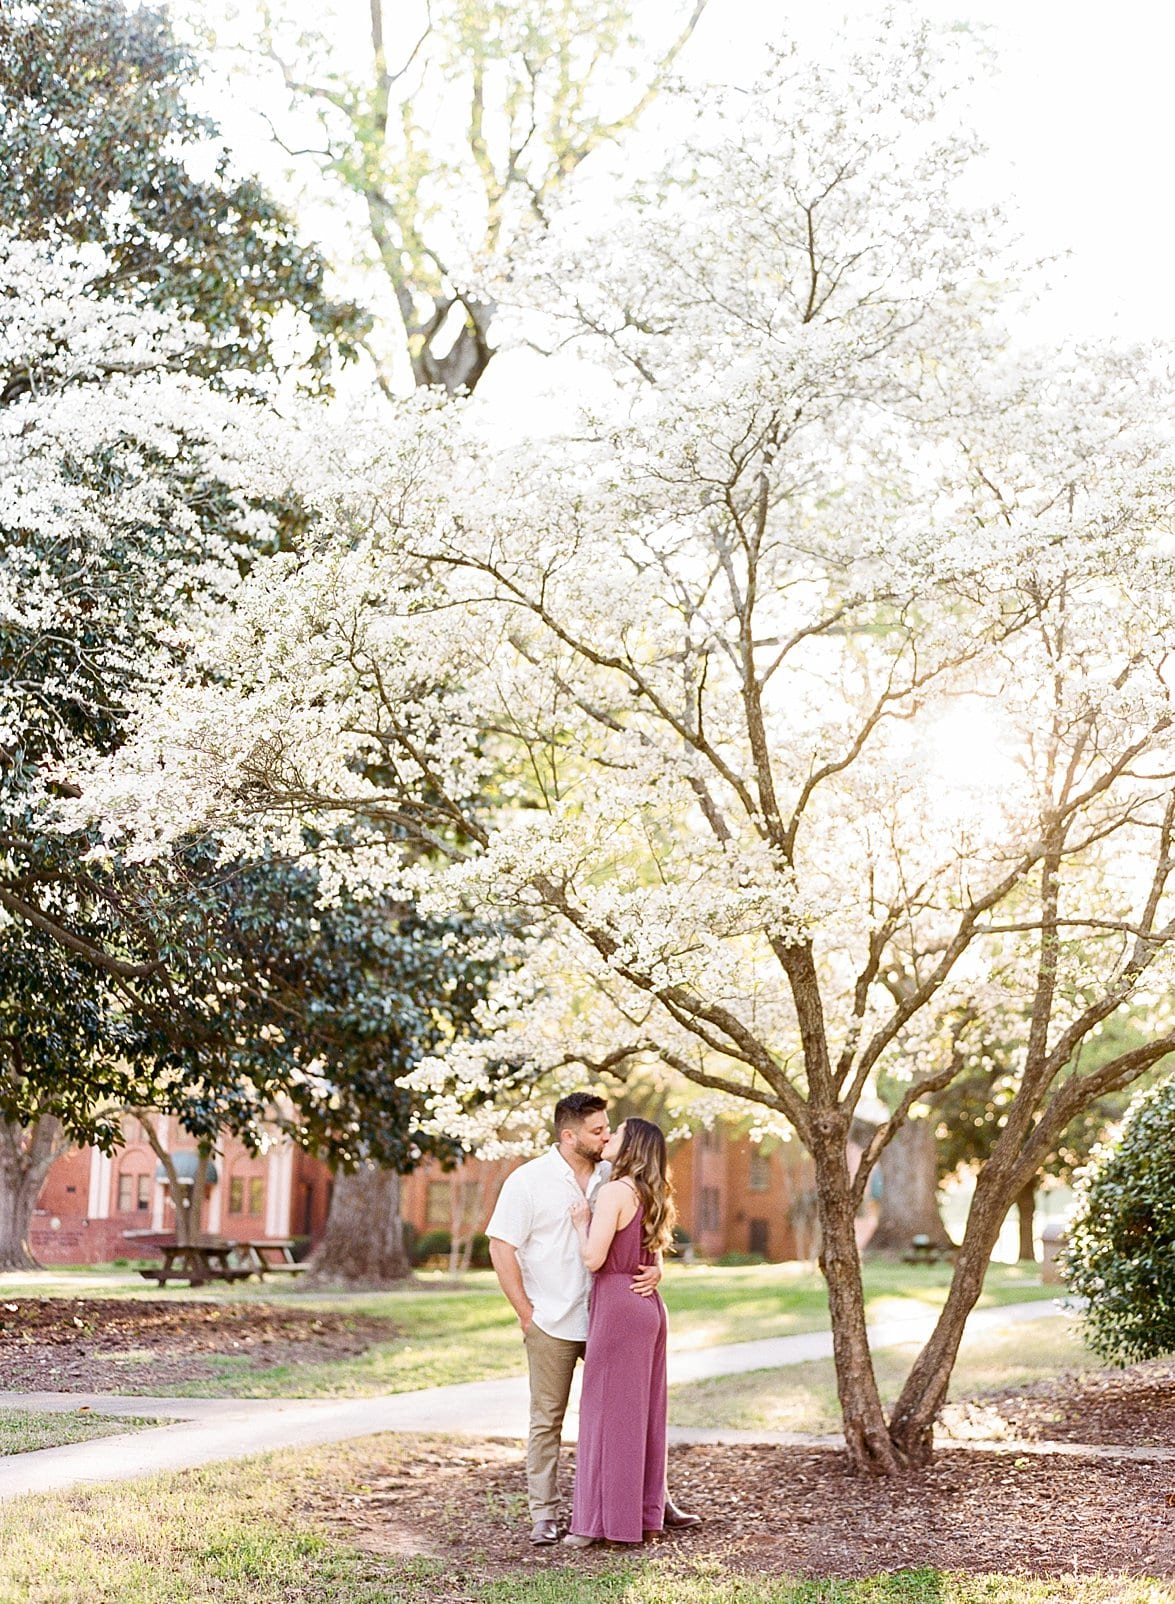 Raleigh couple embracing under a tree blooming for spring time photo